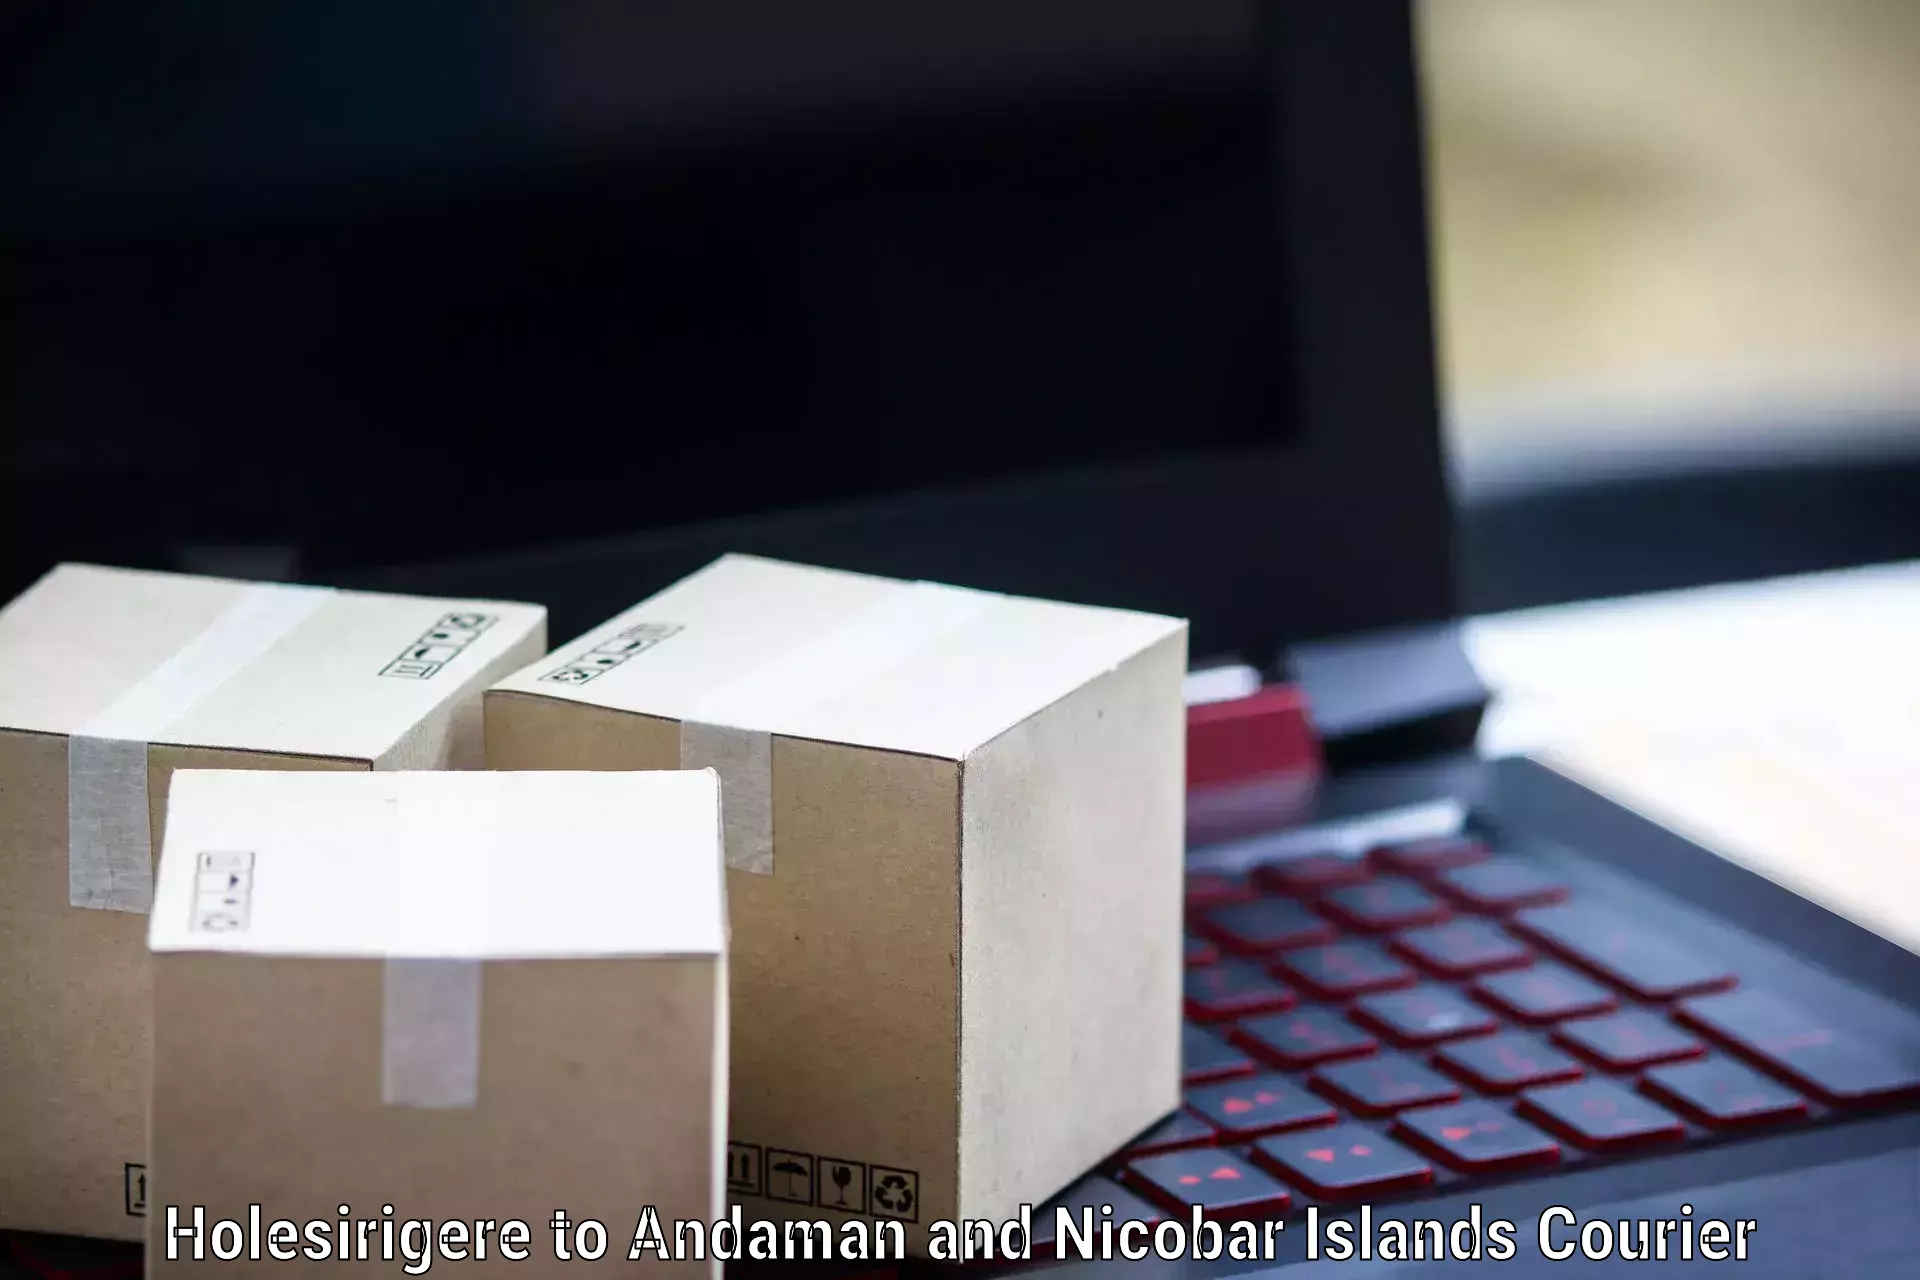 Smart courier technologies Holesirigere to Andaman and Nicobar Islands